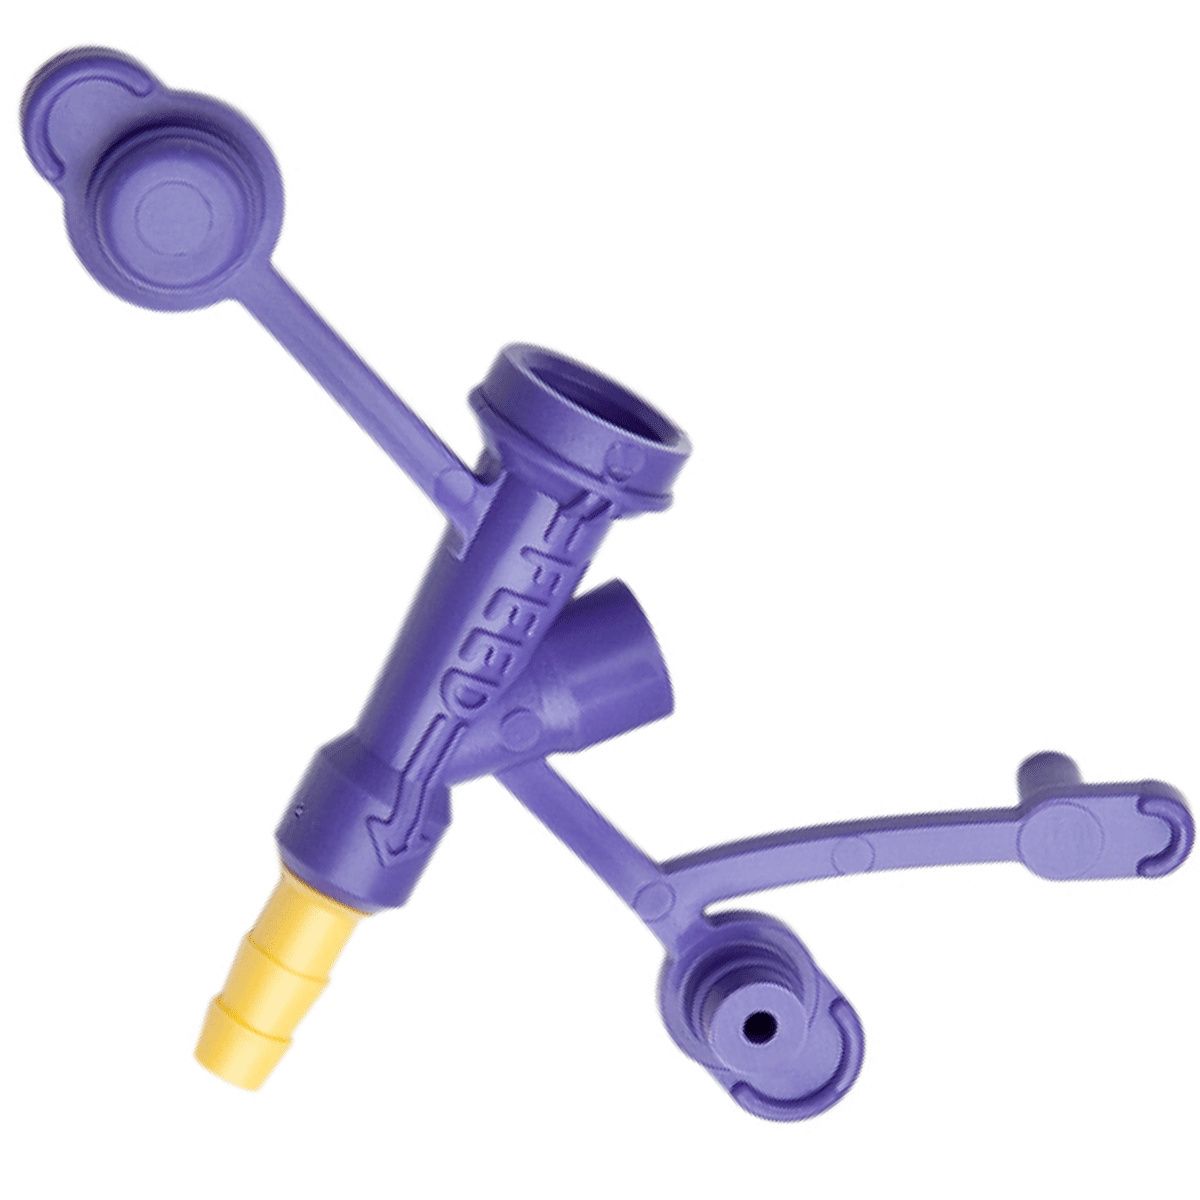 https://i.webareacontrol.com/fullimage/1000-X-1000/7/s/7720203047covidien-kangaroo-y-port-peg-adapter-with-safe-enteral-connections-P.png